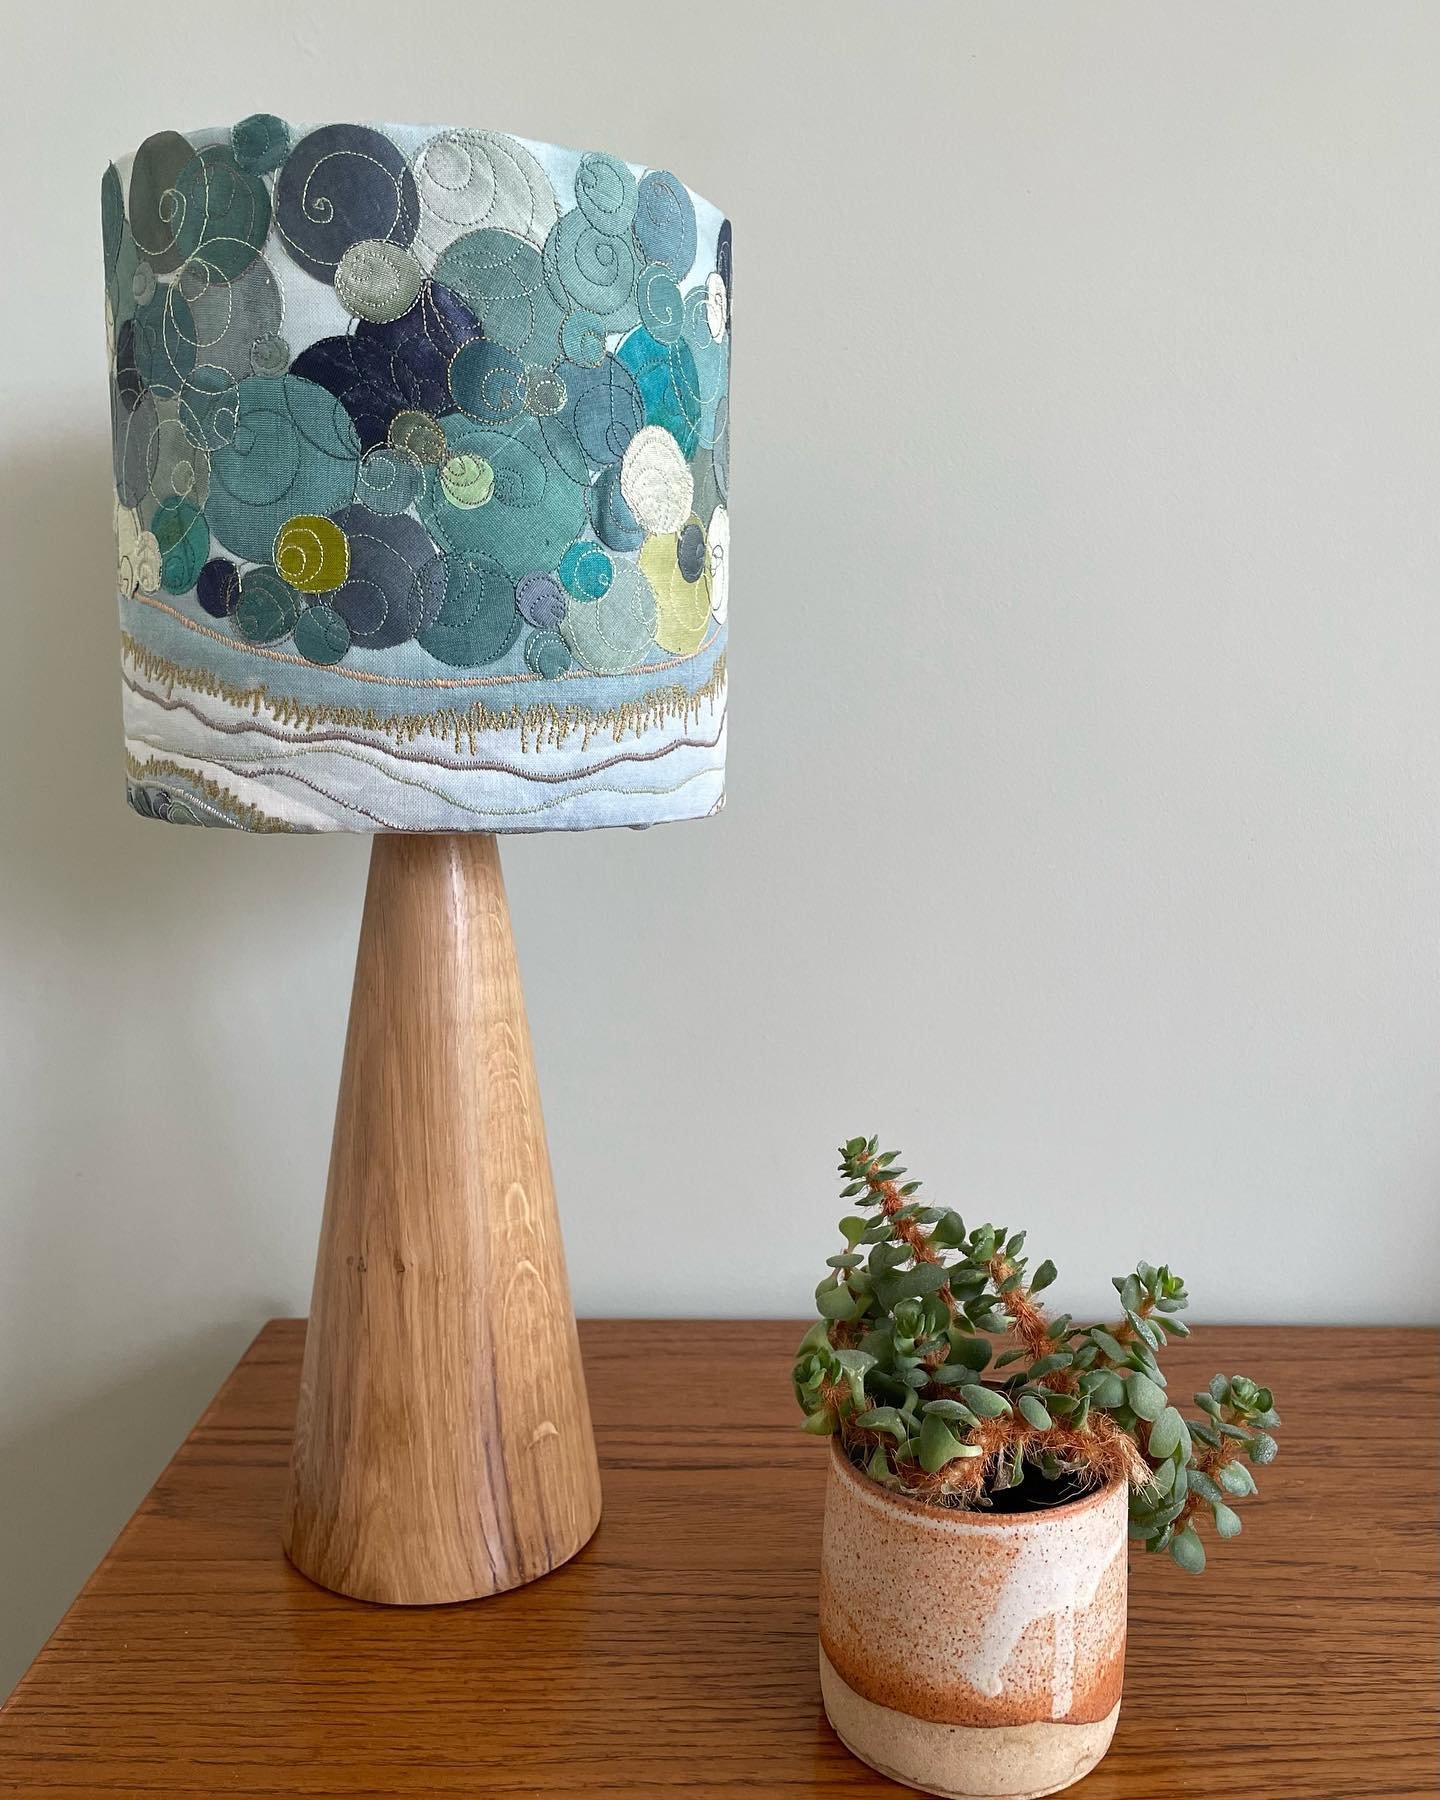 I&rsquo;m exhibiting these embroidered lampshades soon at the @westbristolarts Trail over the weekend of 14/15 October. I&rsquo;ve been invited to join artists at @stridetreglown architects in their beautiful offices on The Promenade. The lampshades 